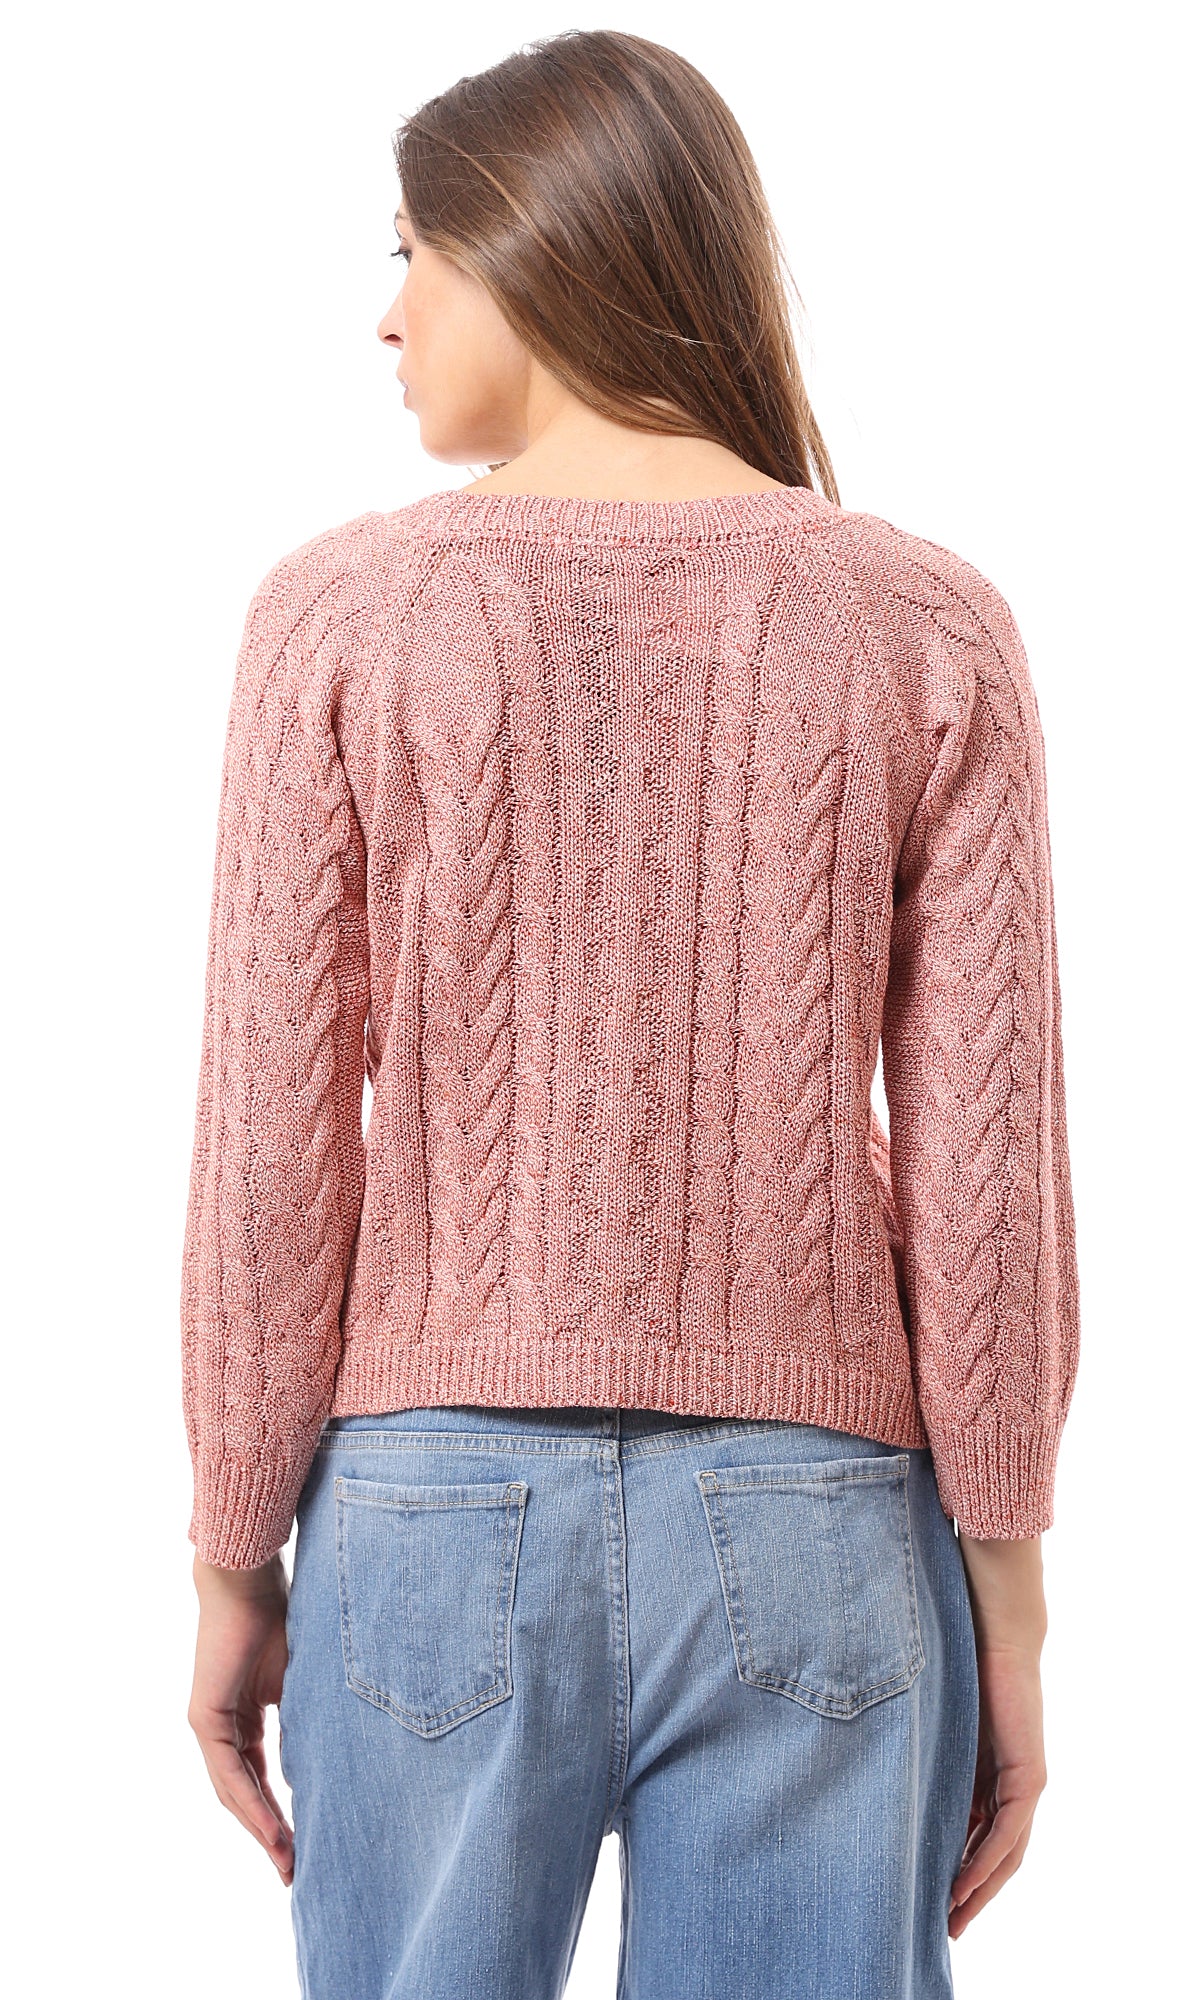 O169979 Boat Neck Slip On Coral Knitted Pullover